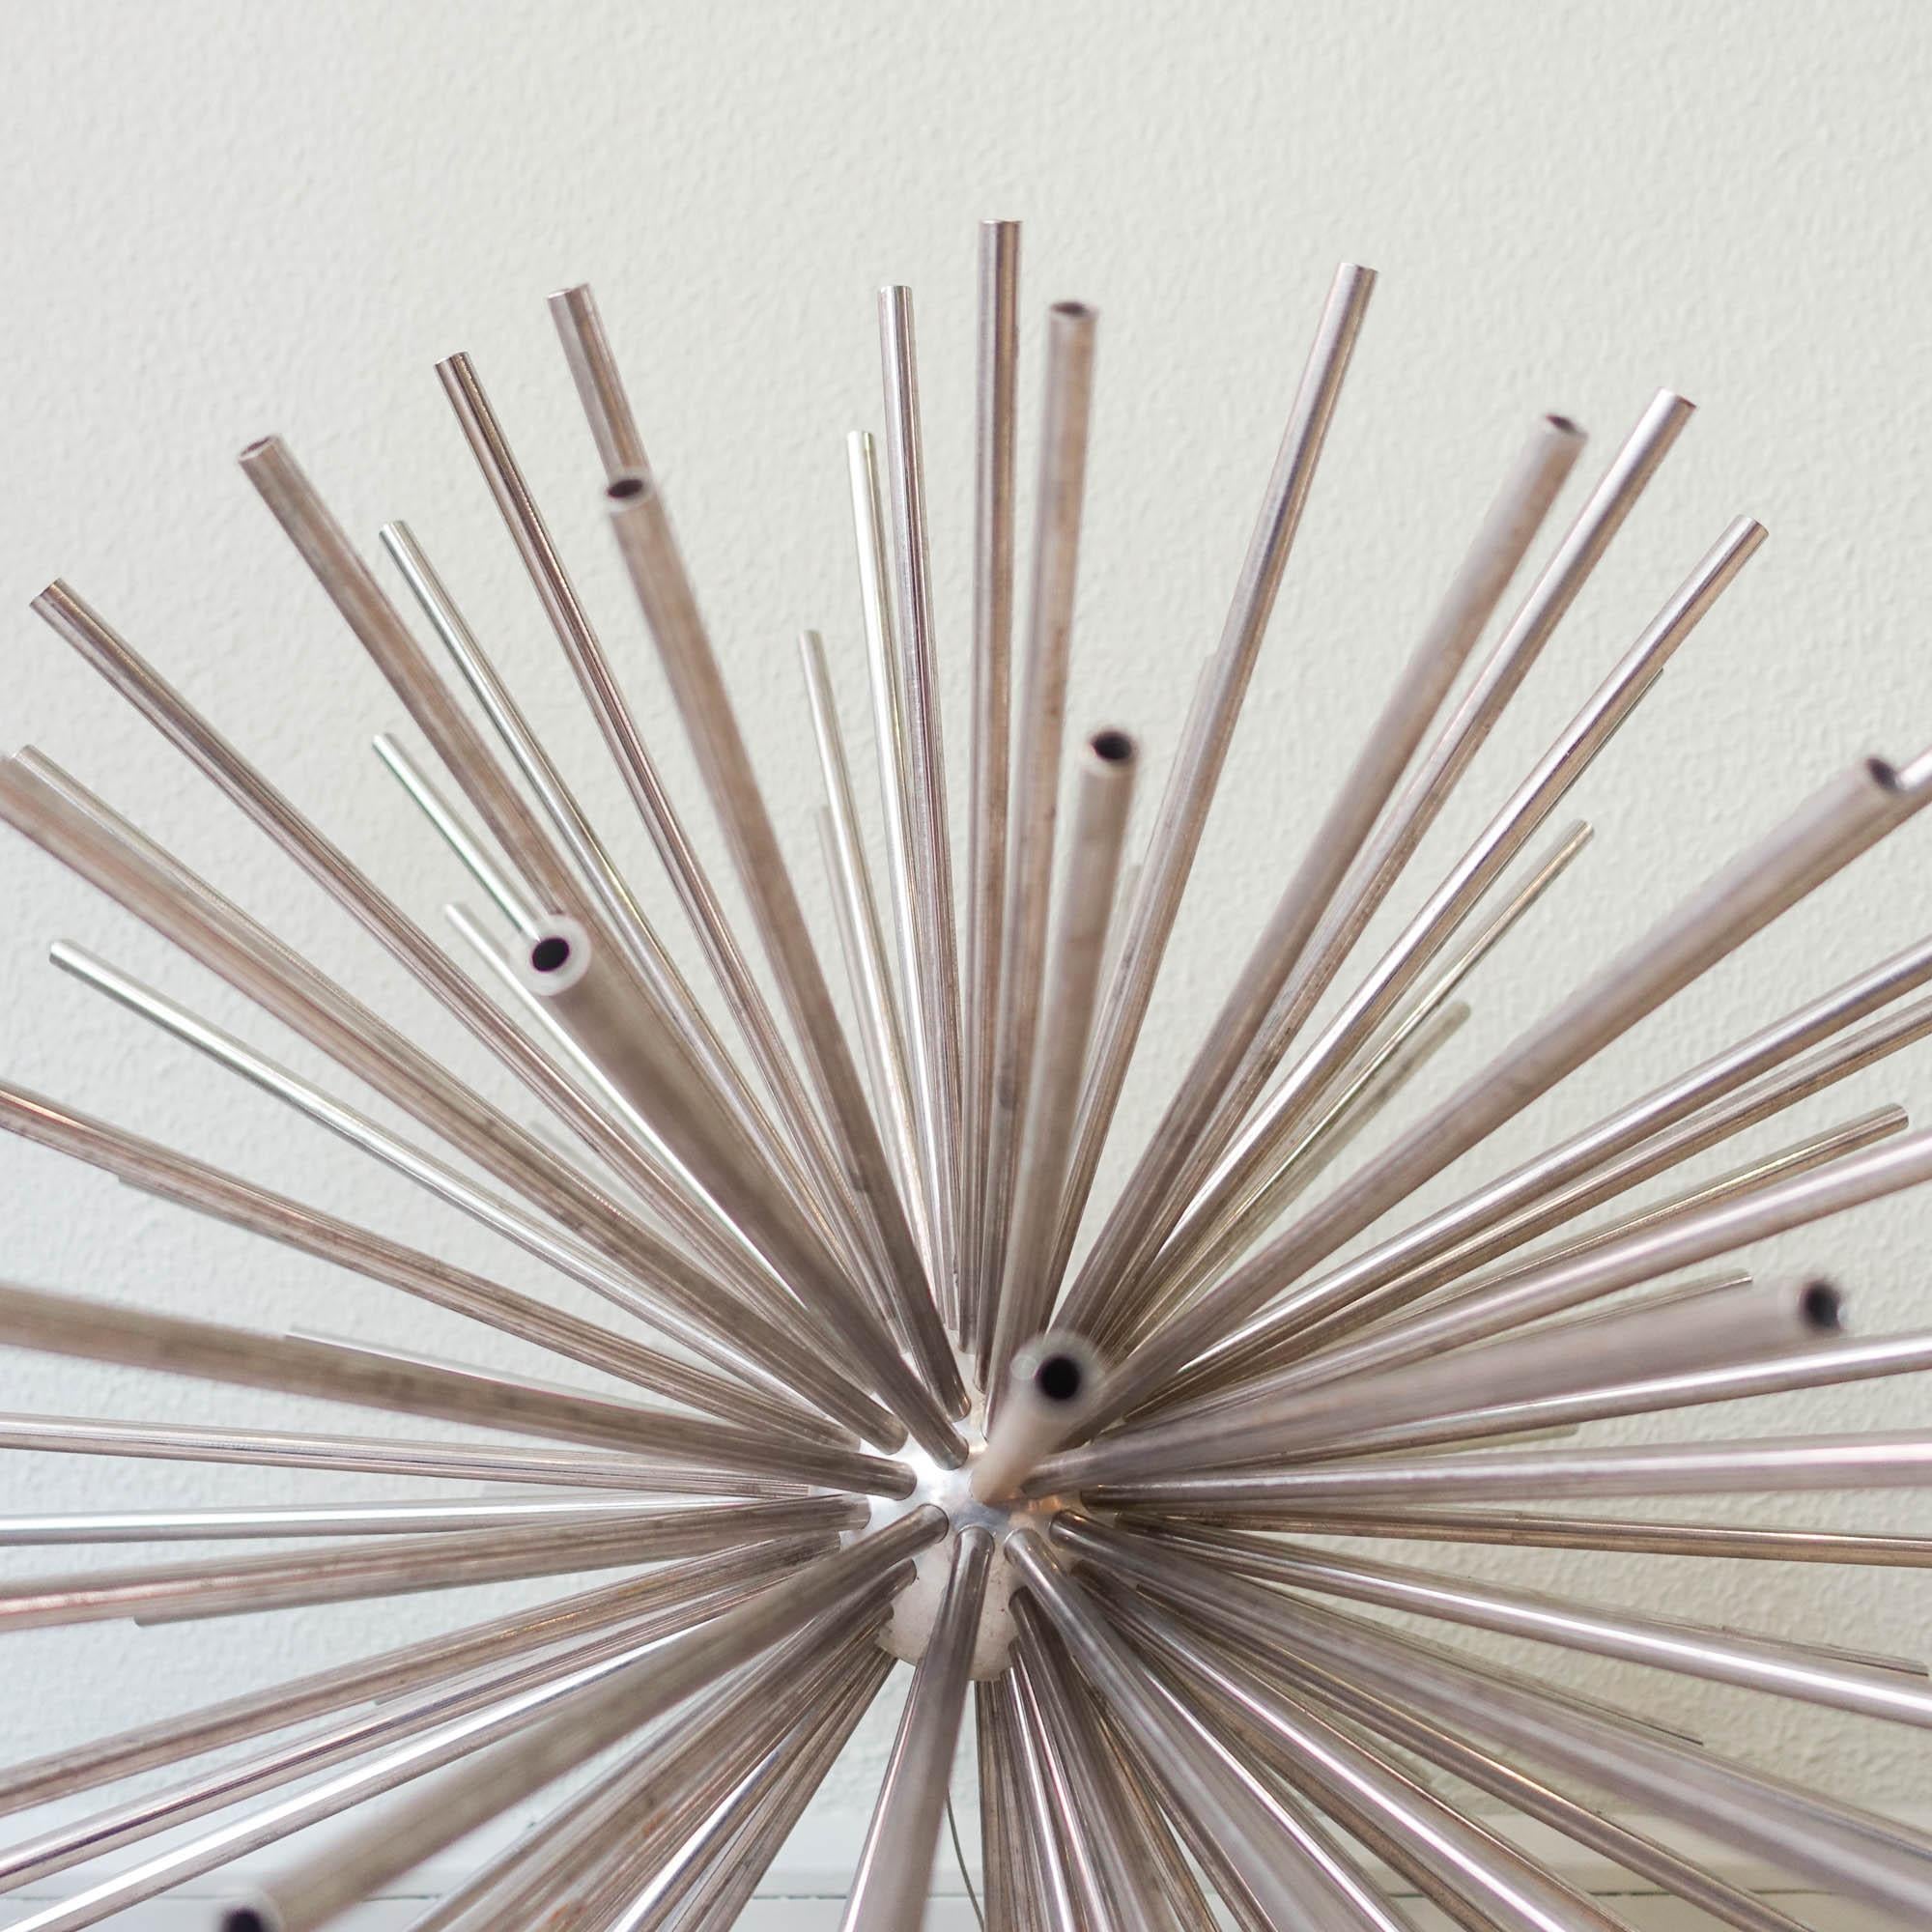 This sputnik sculpture was designed by Curtis Jere, in USA, during the 1960s. It is made of metal and nickel plated with a sunburst shaped pattern. Curtis Jeré was the shared pseudonym of two artists, Curtis Freiler and Jerry Fels, who used enamel,